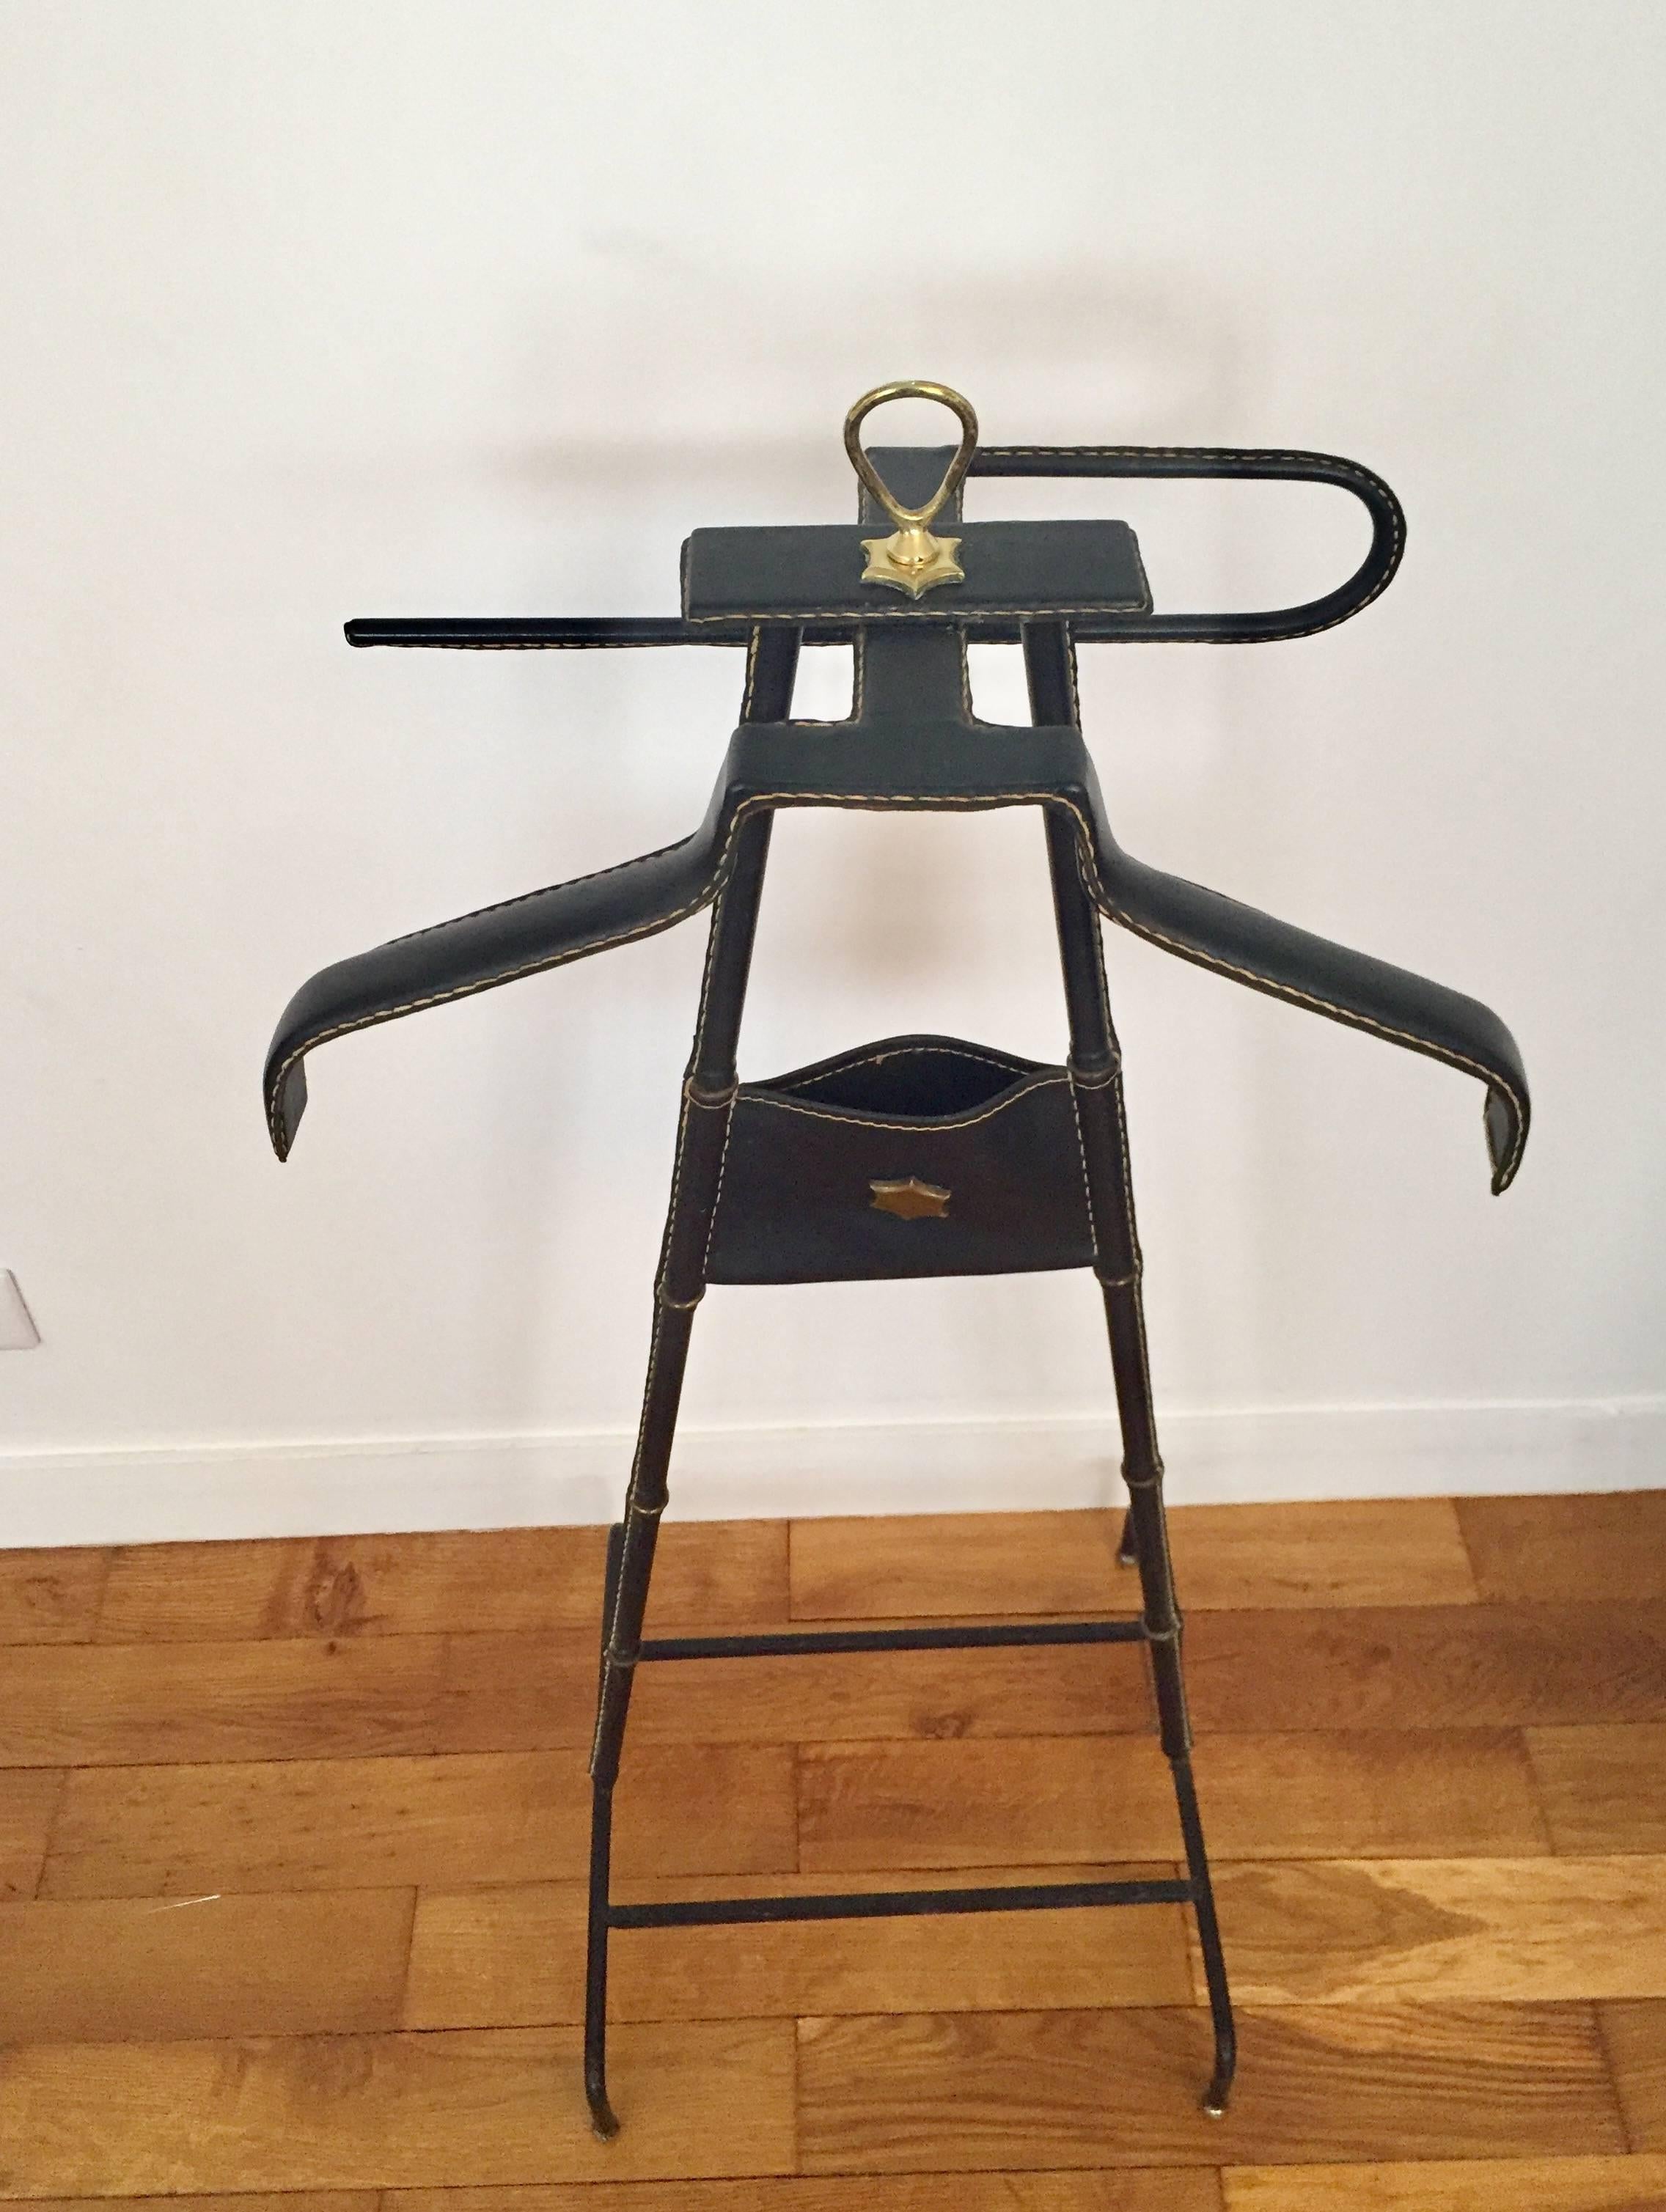 Black leather valet by Jacques Adnet decorated with two brass stars: one on the top of the valet and the second on a central pocket, 
circa 1950
Great original condition
Measures: Height 106 cm width 45 cm depth 39 cm.